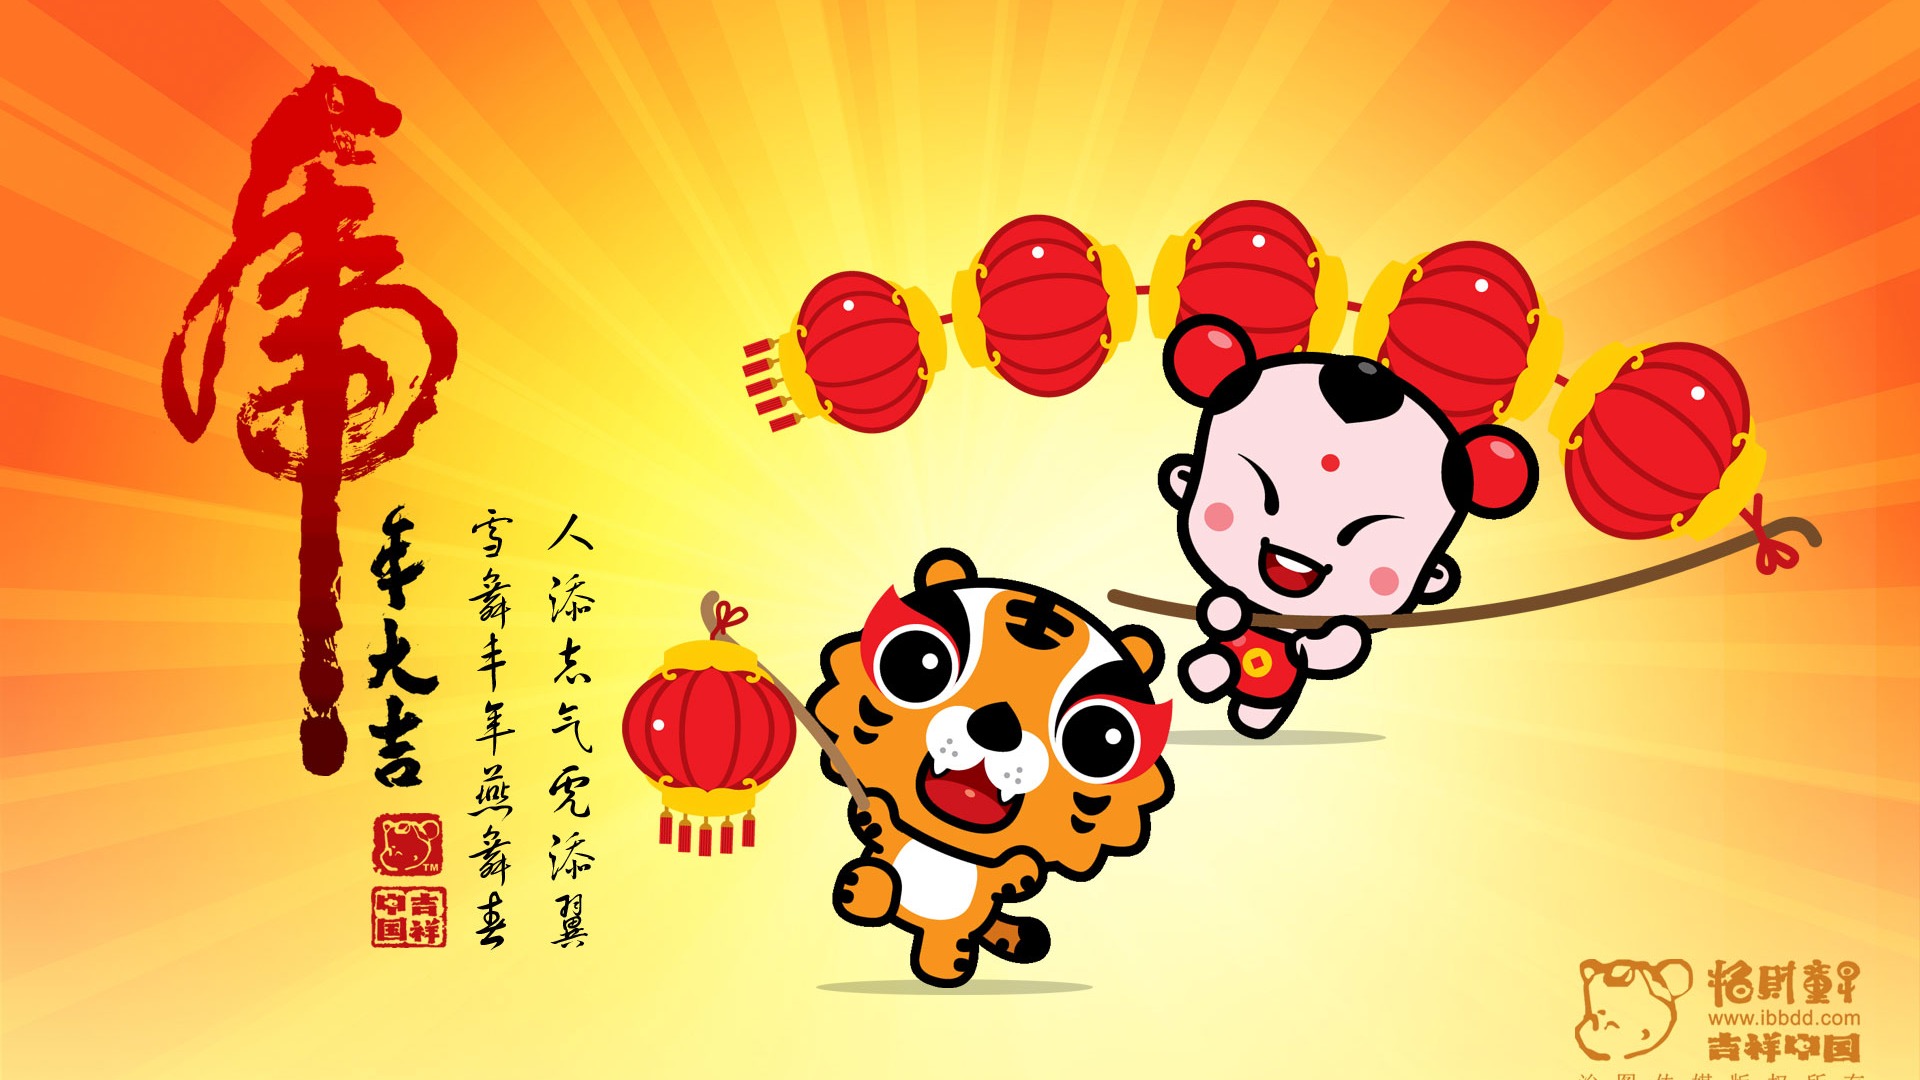 Lucky Boy Year of the Tiger Wallpaper #11 - 1920x1080